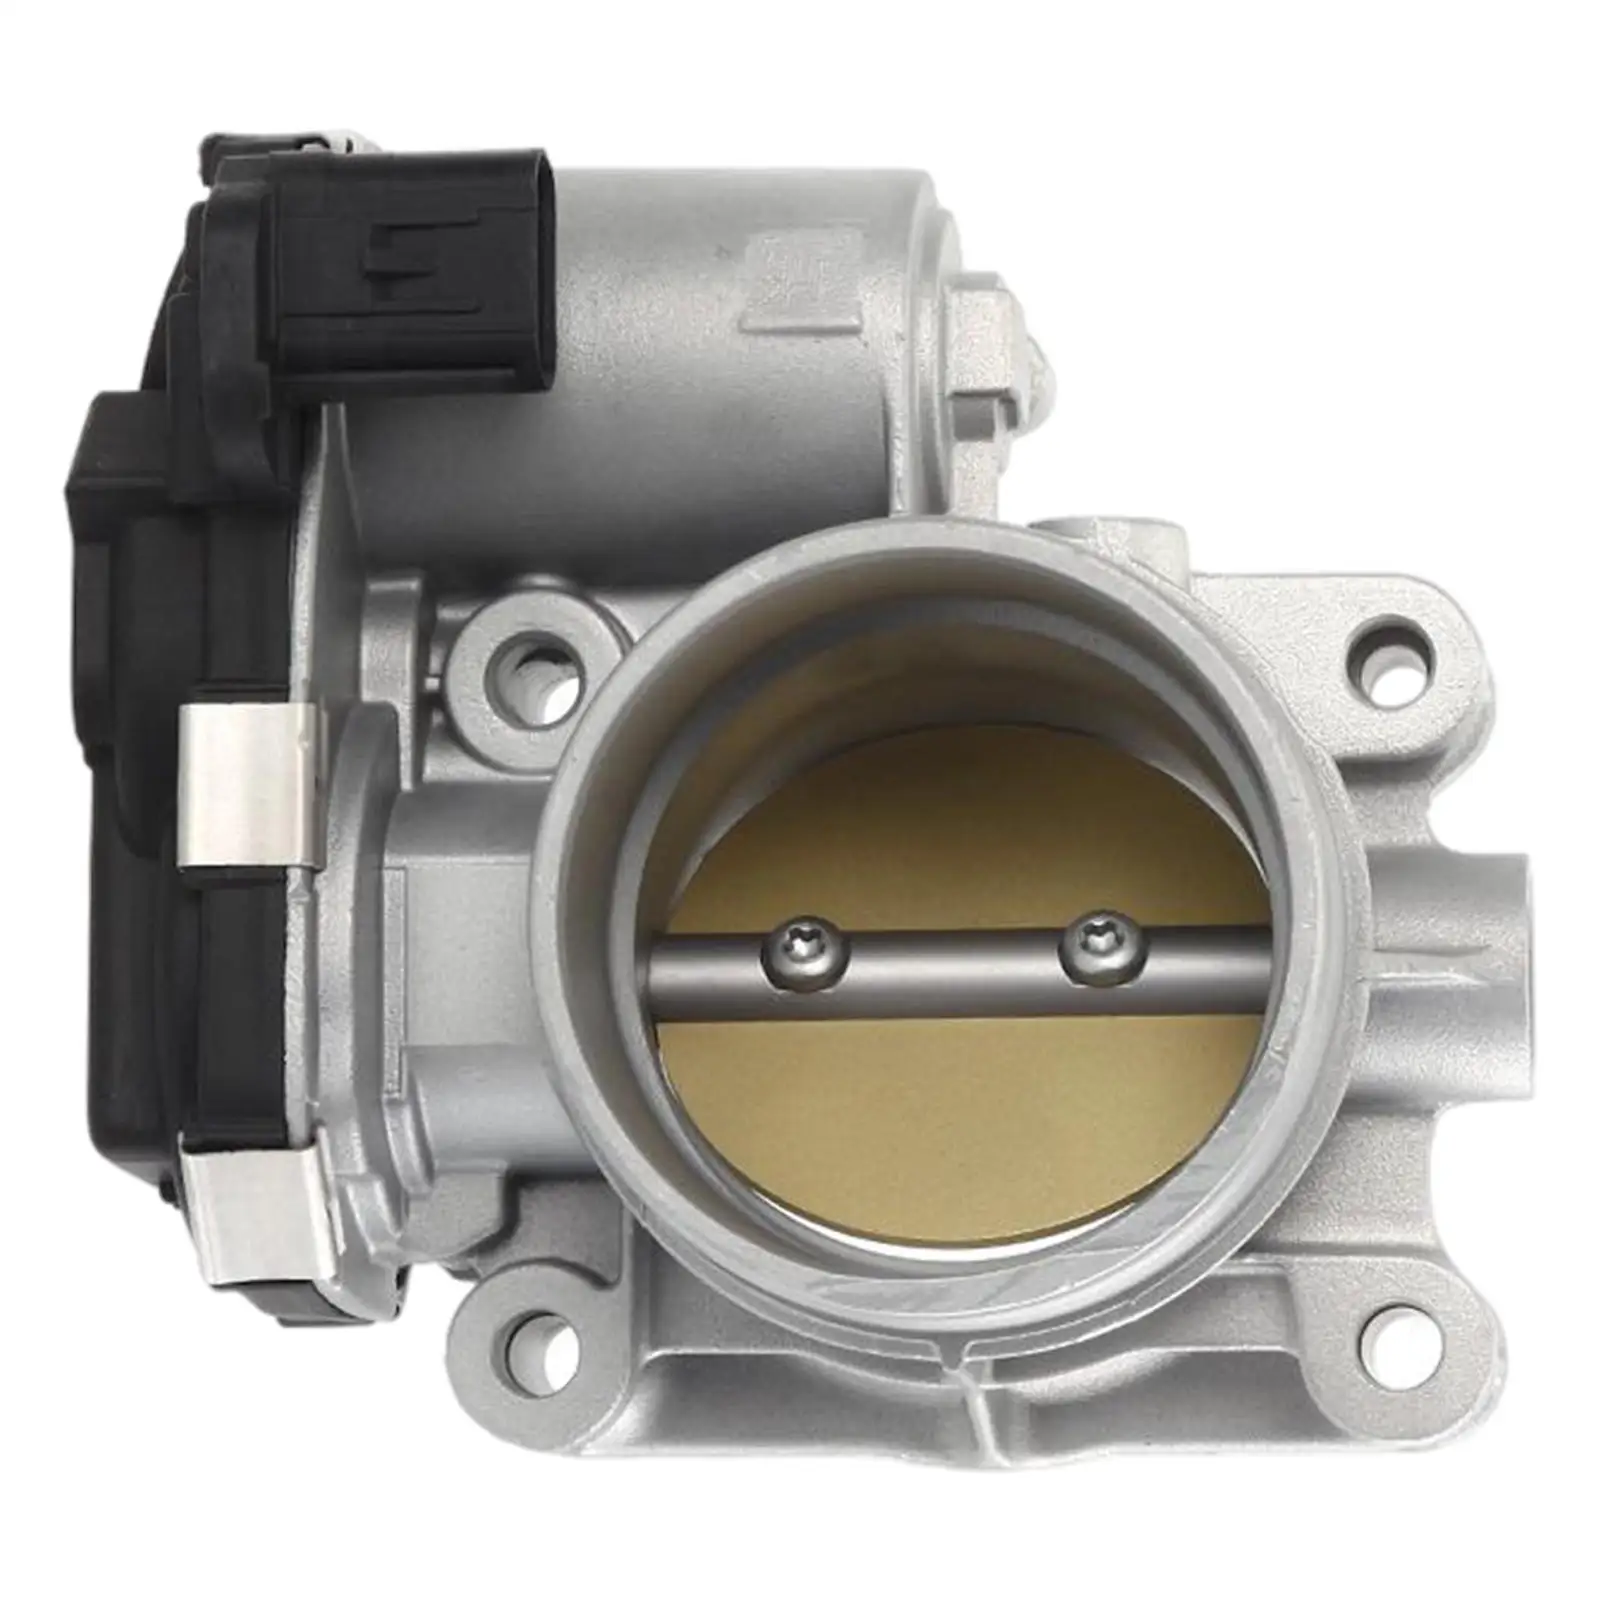 Throttle Body Valve Assembly Fits for Cadillac Replace Accessories Car Parts 12627217DA